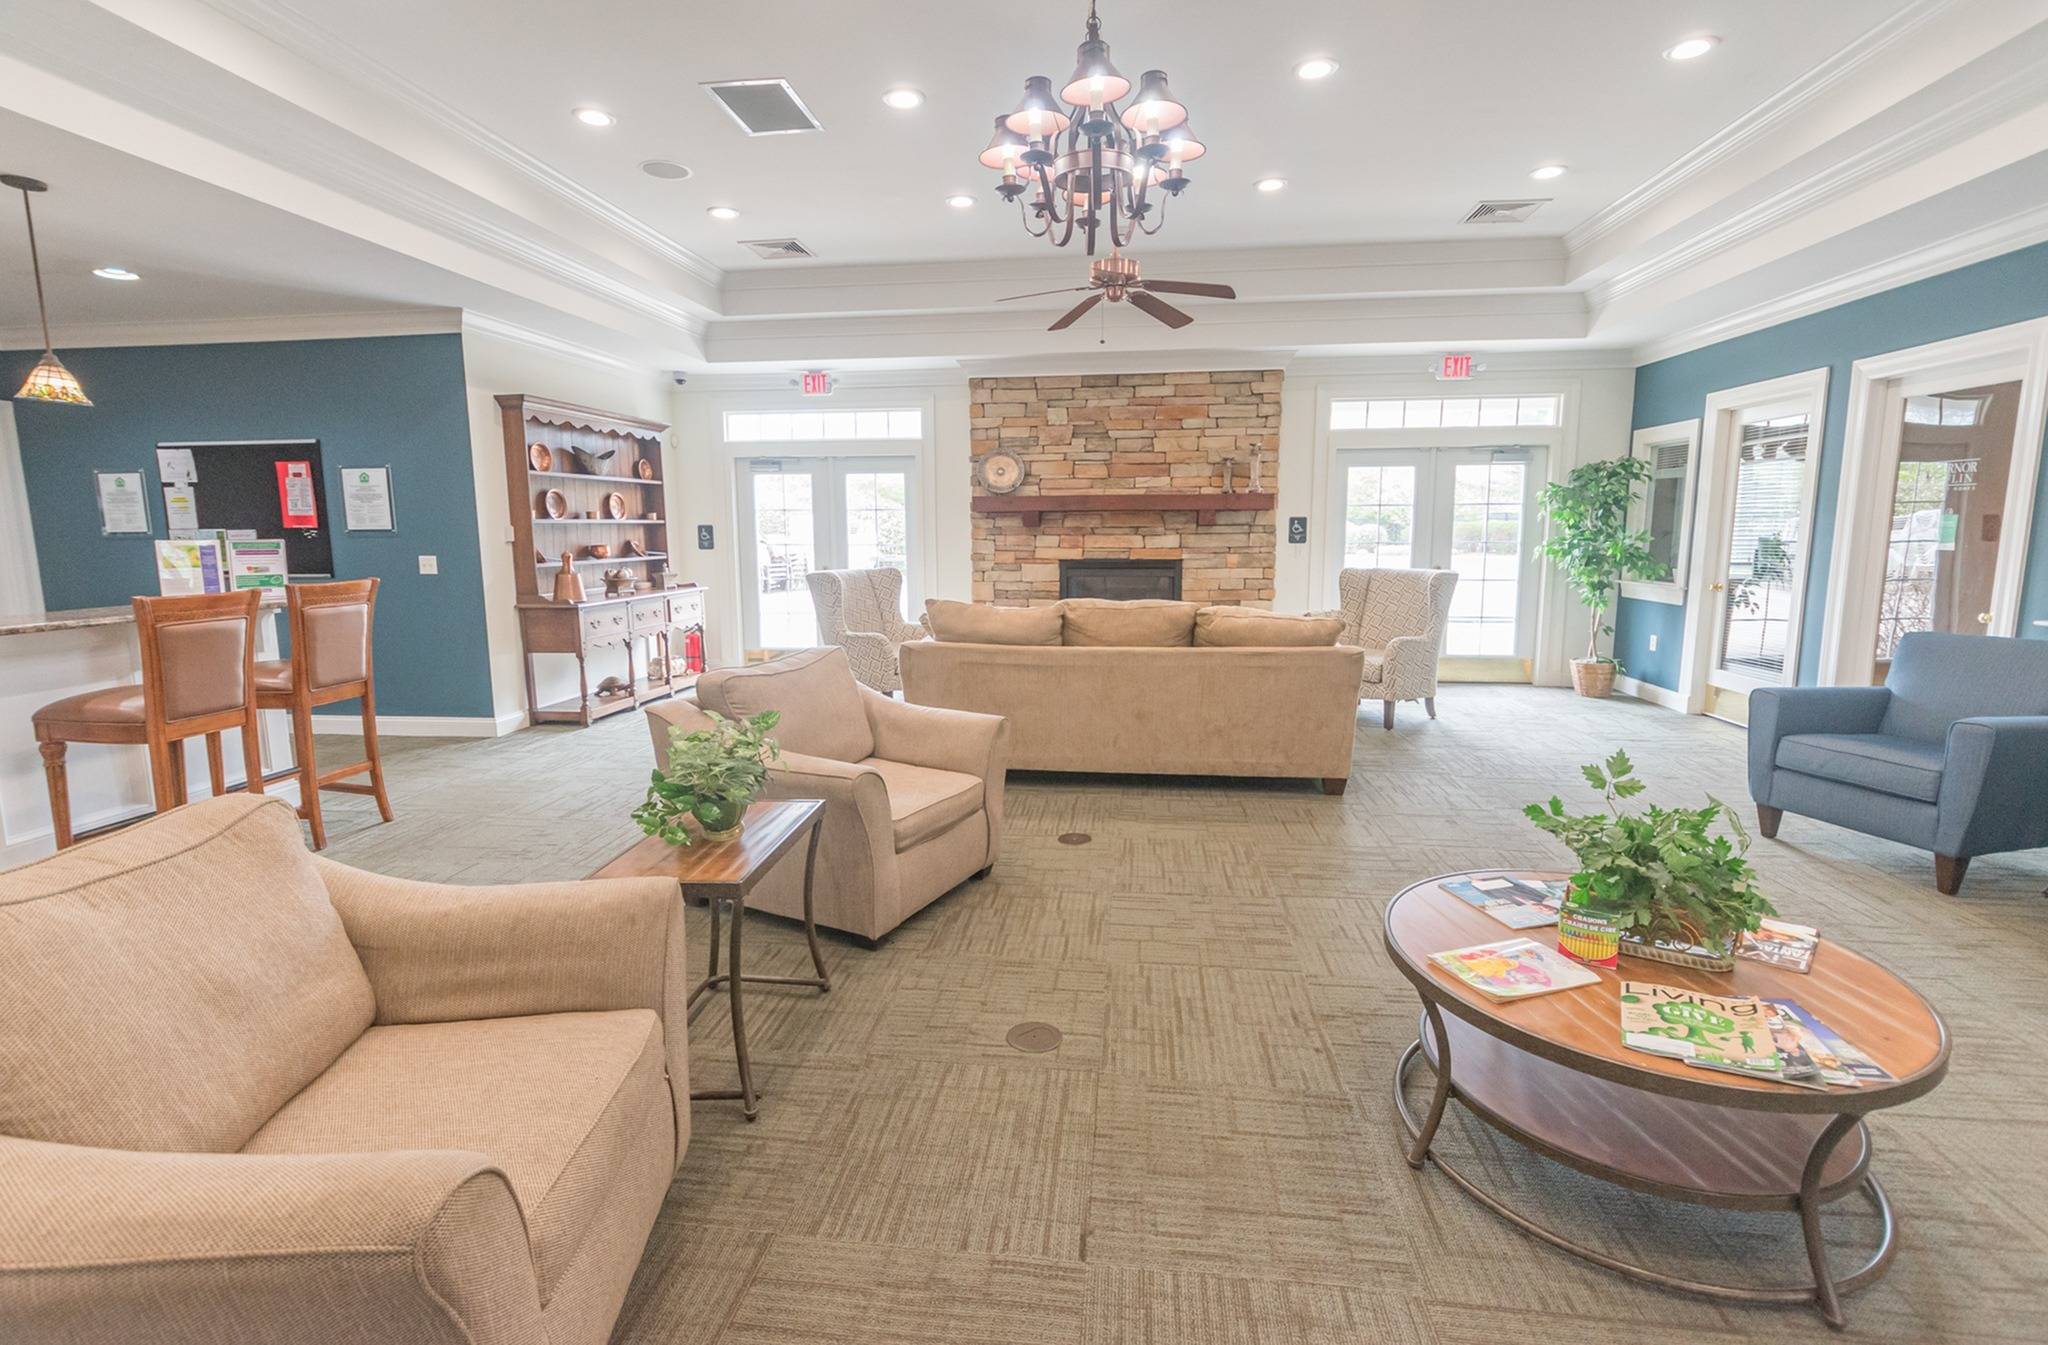 Spacious resident lounge with plenty of seating options and fireplace.